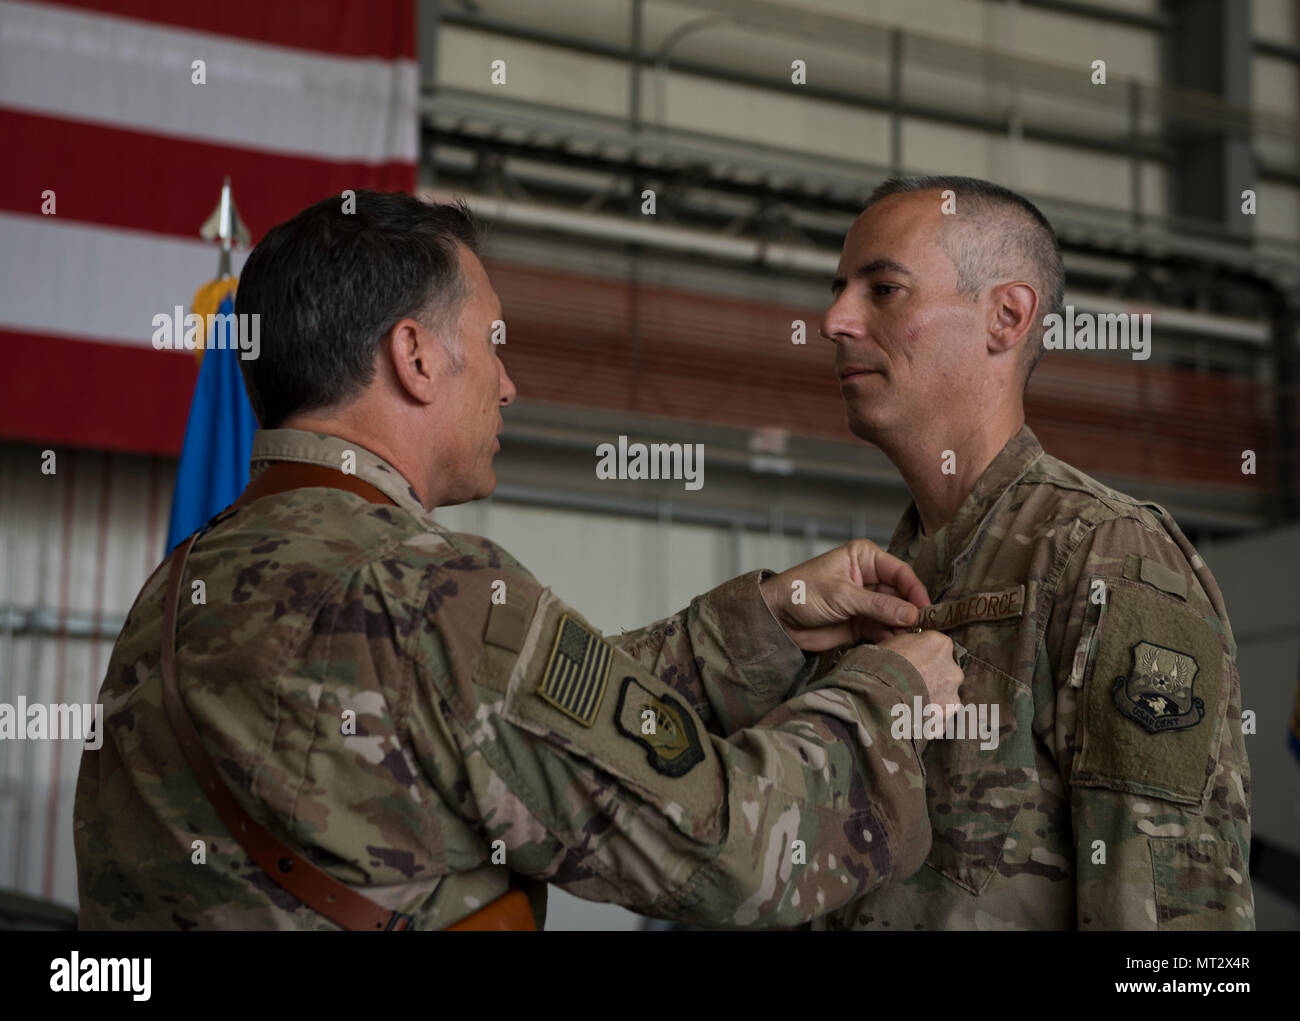 Col. Bradford Coley, the outgoing 455th Expeditionary Mission Support Group commander, receives the Bronze Star Medal from Brig. Gen. Craig Baker, the 455th Air Expeditionary Wing commander, during the 455th EMSG change of command ceremony at Bagram Airfield, Afghanistan, July 20, 2017. Coley commanded the 455th EMSG for the last 12 months. (U.S. Air Force photo by Staff Sgt. Benjamin Gonsier) Stock Photo